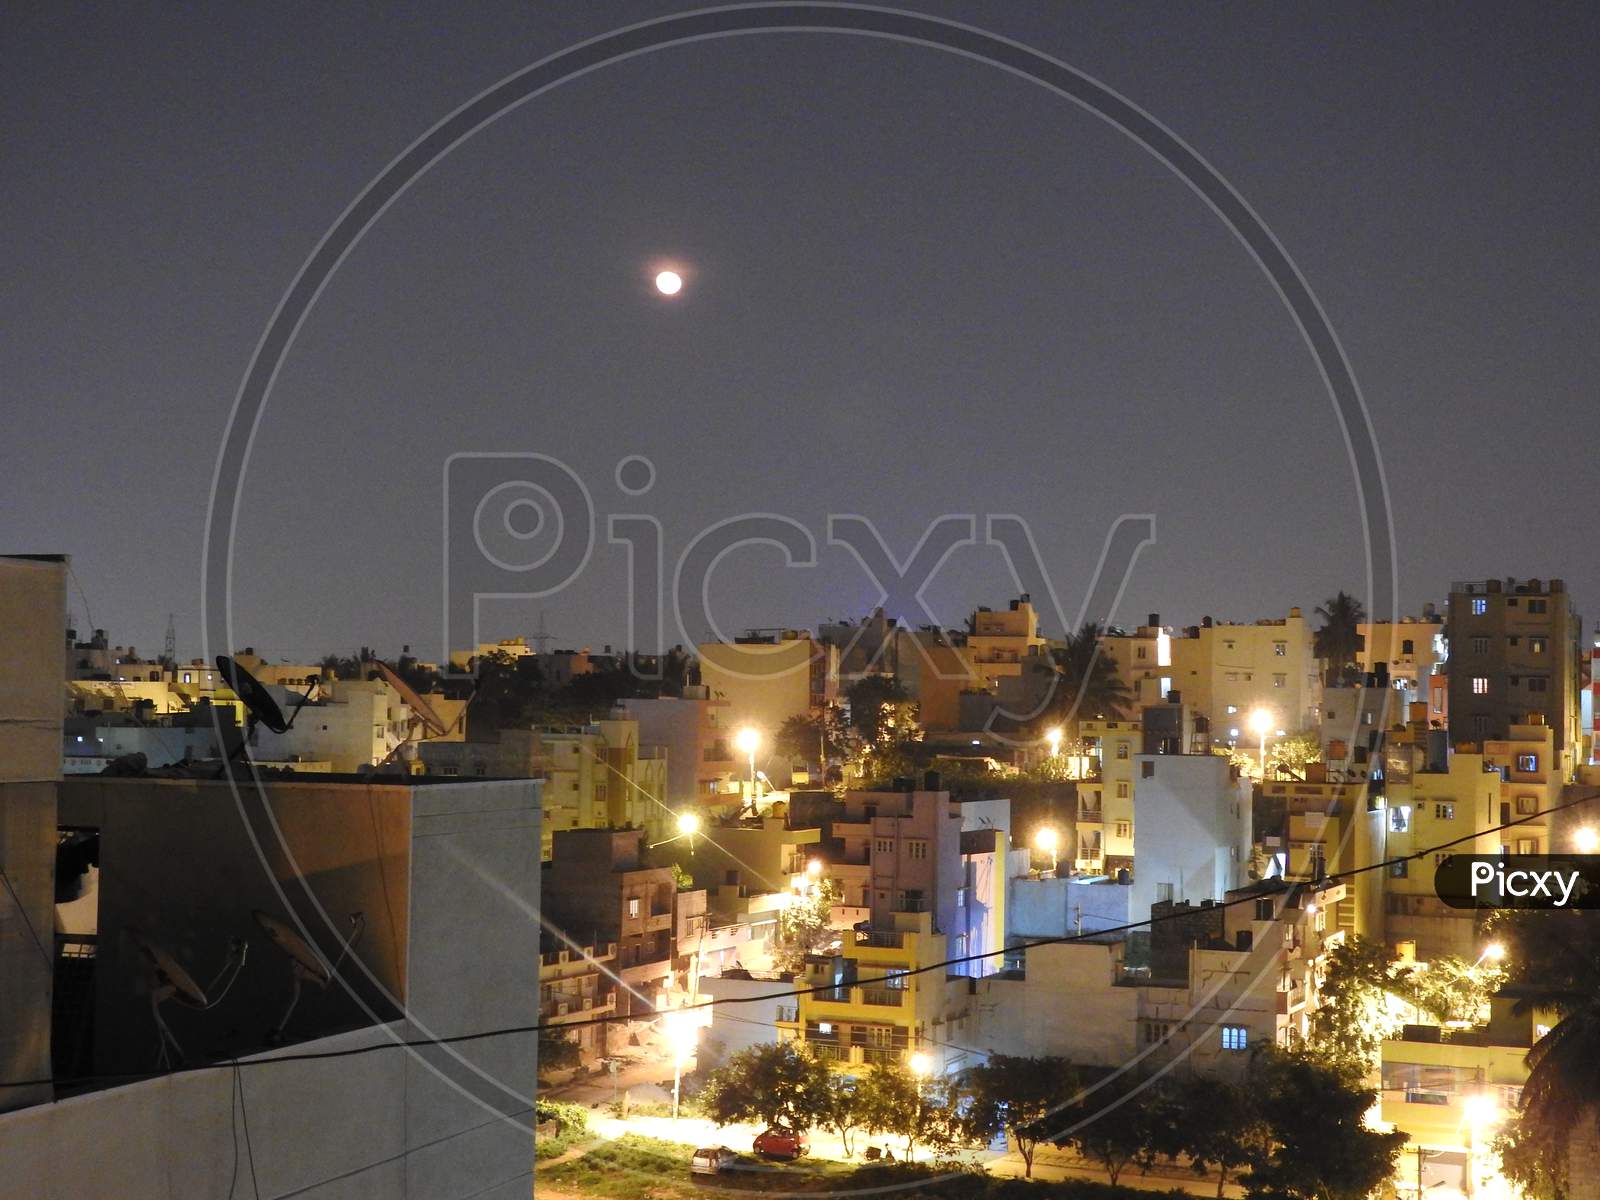 Bangalore Cityscape View At Night With Full Moon And Building Lights Are Glowing